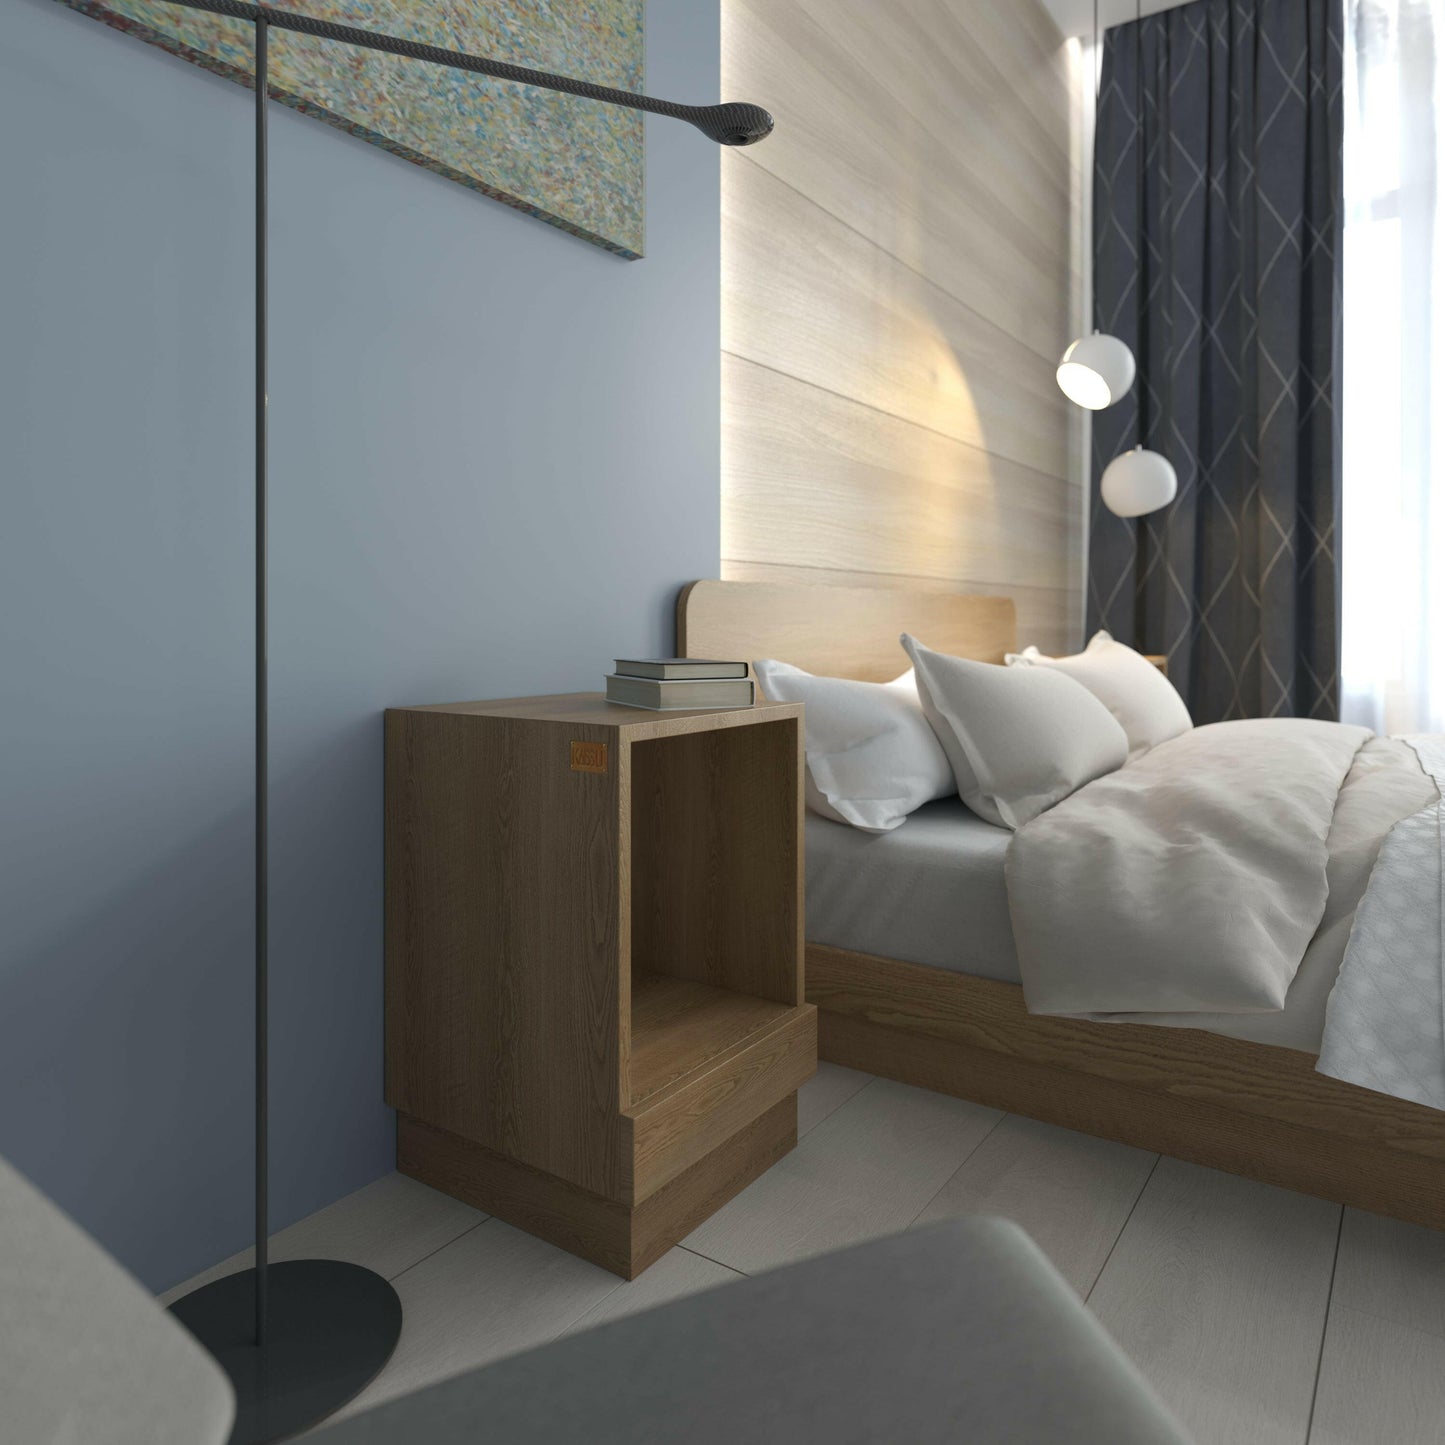 Nightstands | Furniture Store | Home Decor